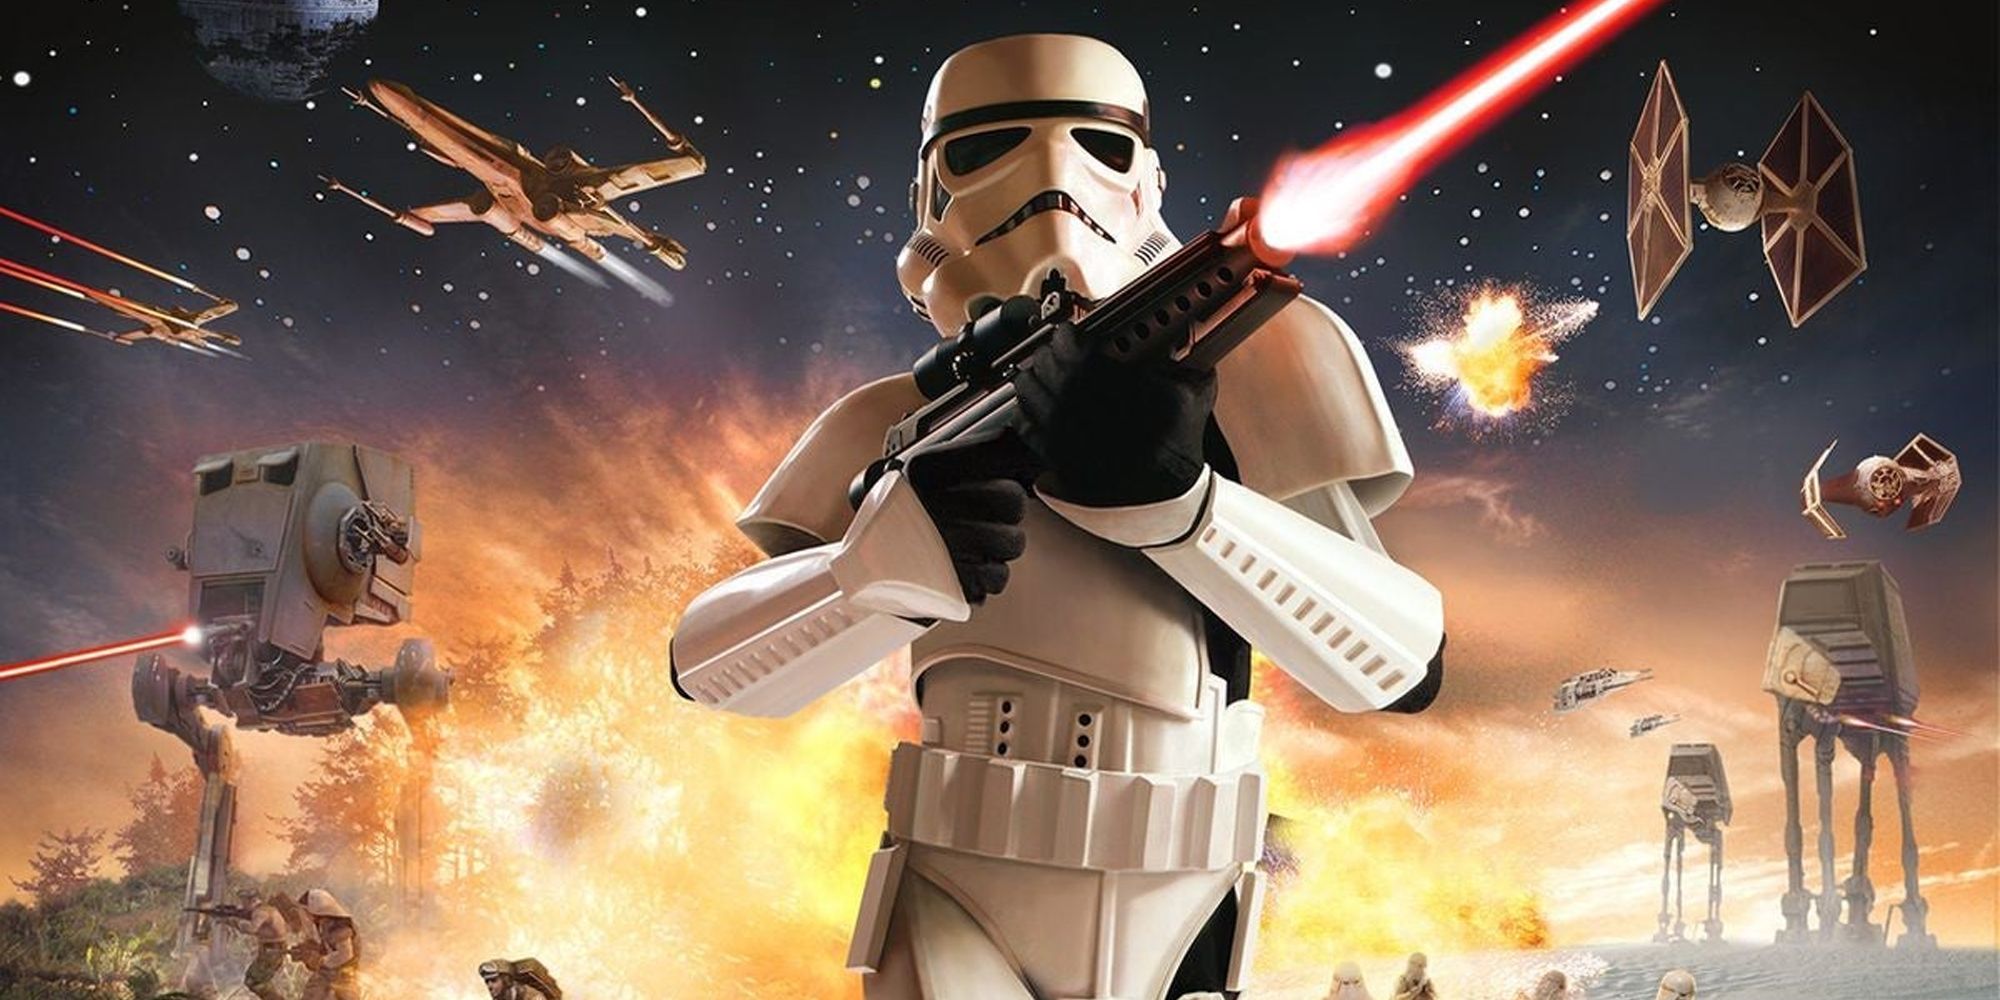 A Stormtrooper firing his blaster in the middle of a galactic space battle